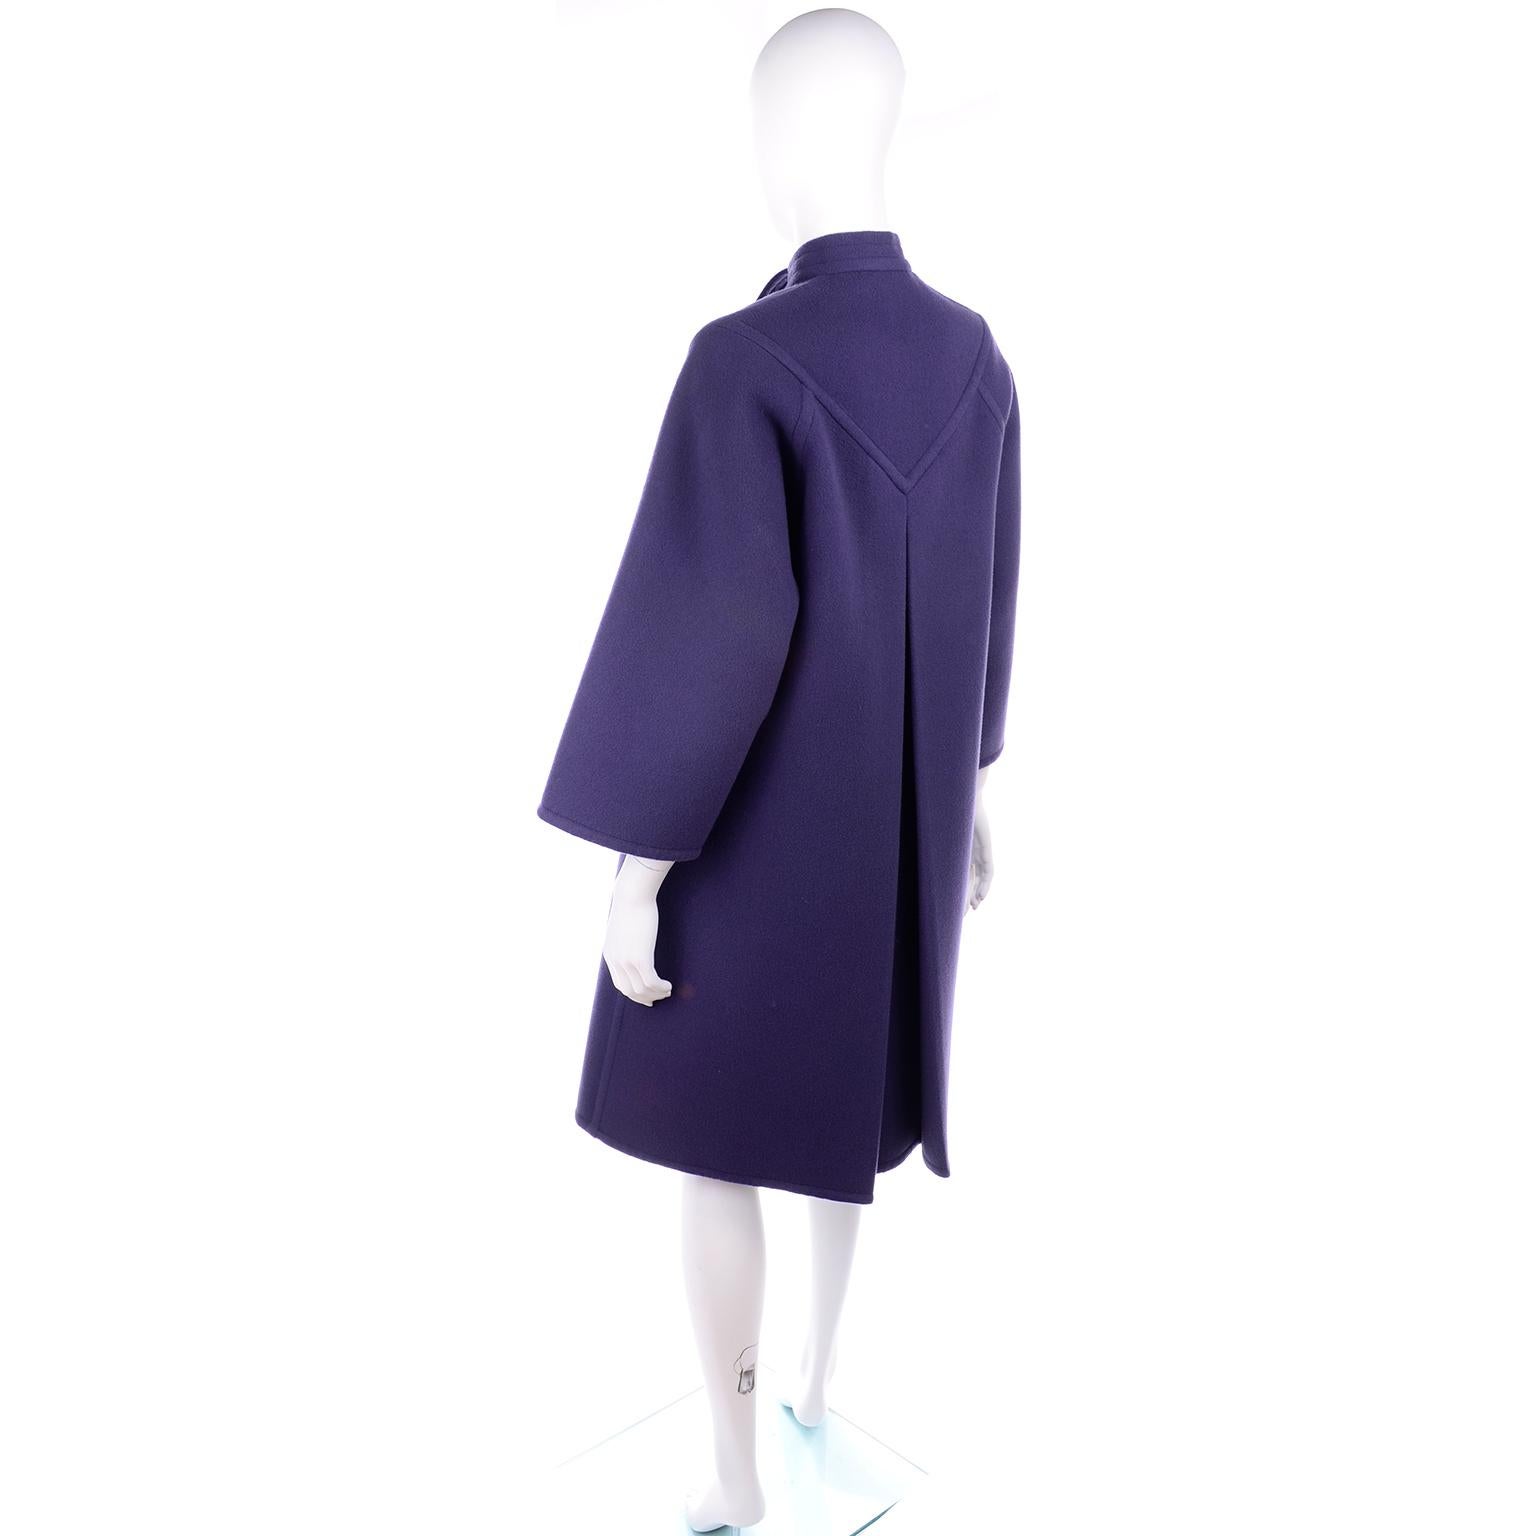 Black James Galanos Vintage Rich Purple Wool Coat with Tie & Pockets For Sale